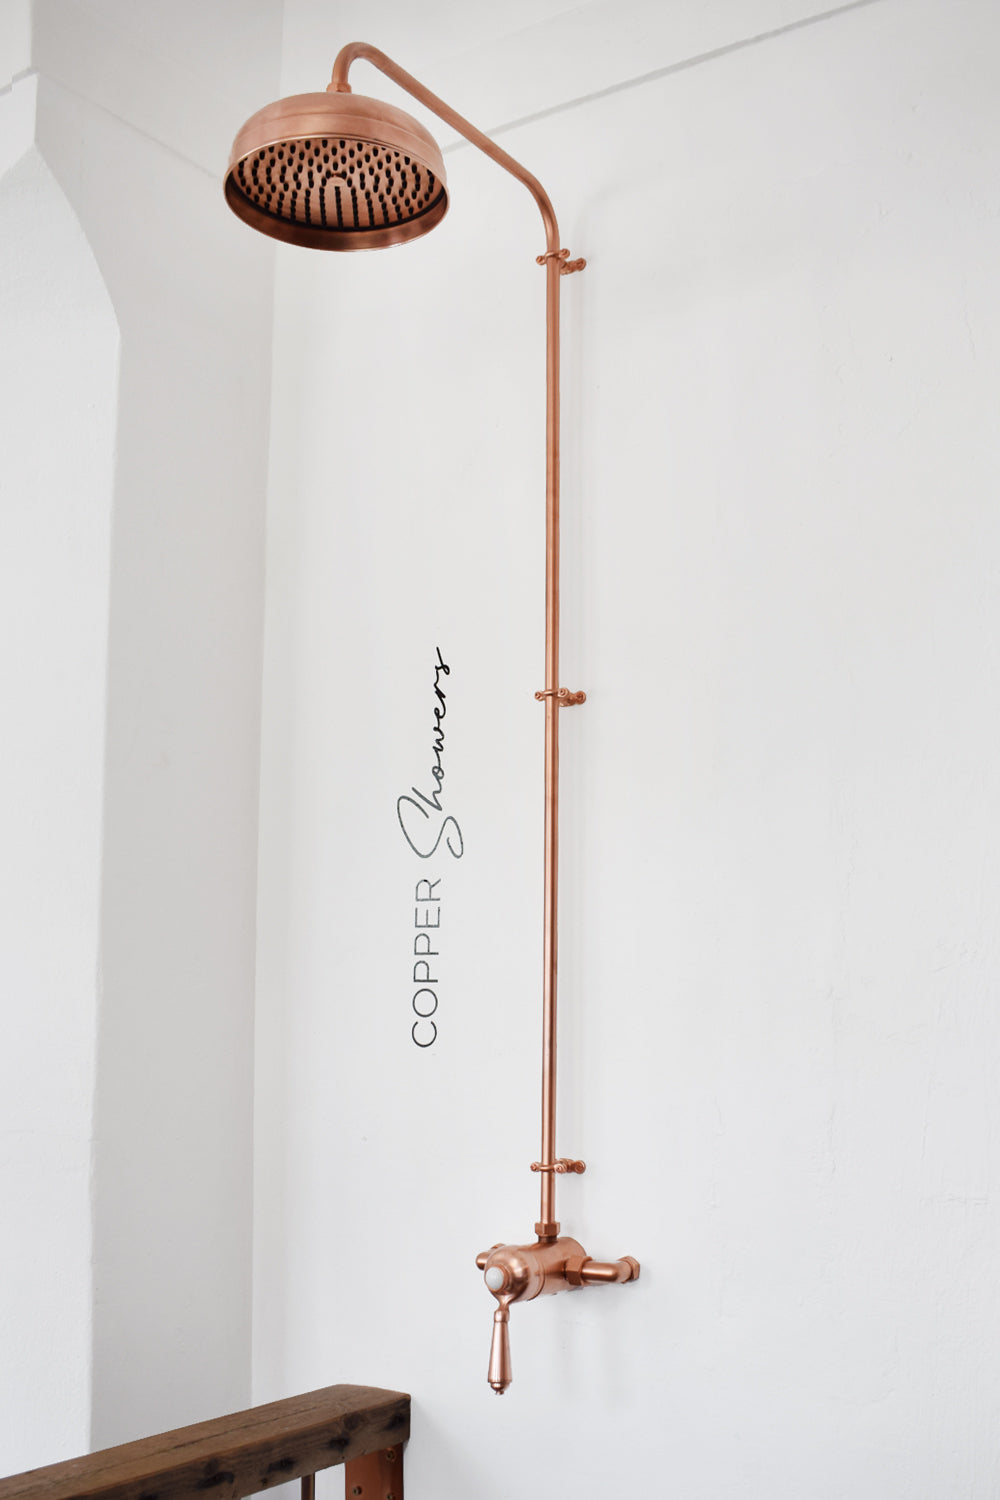 Thermostatic shower system in a copper finish